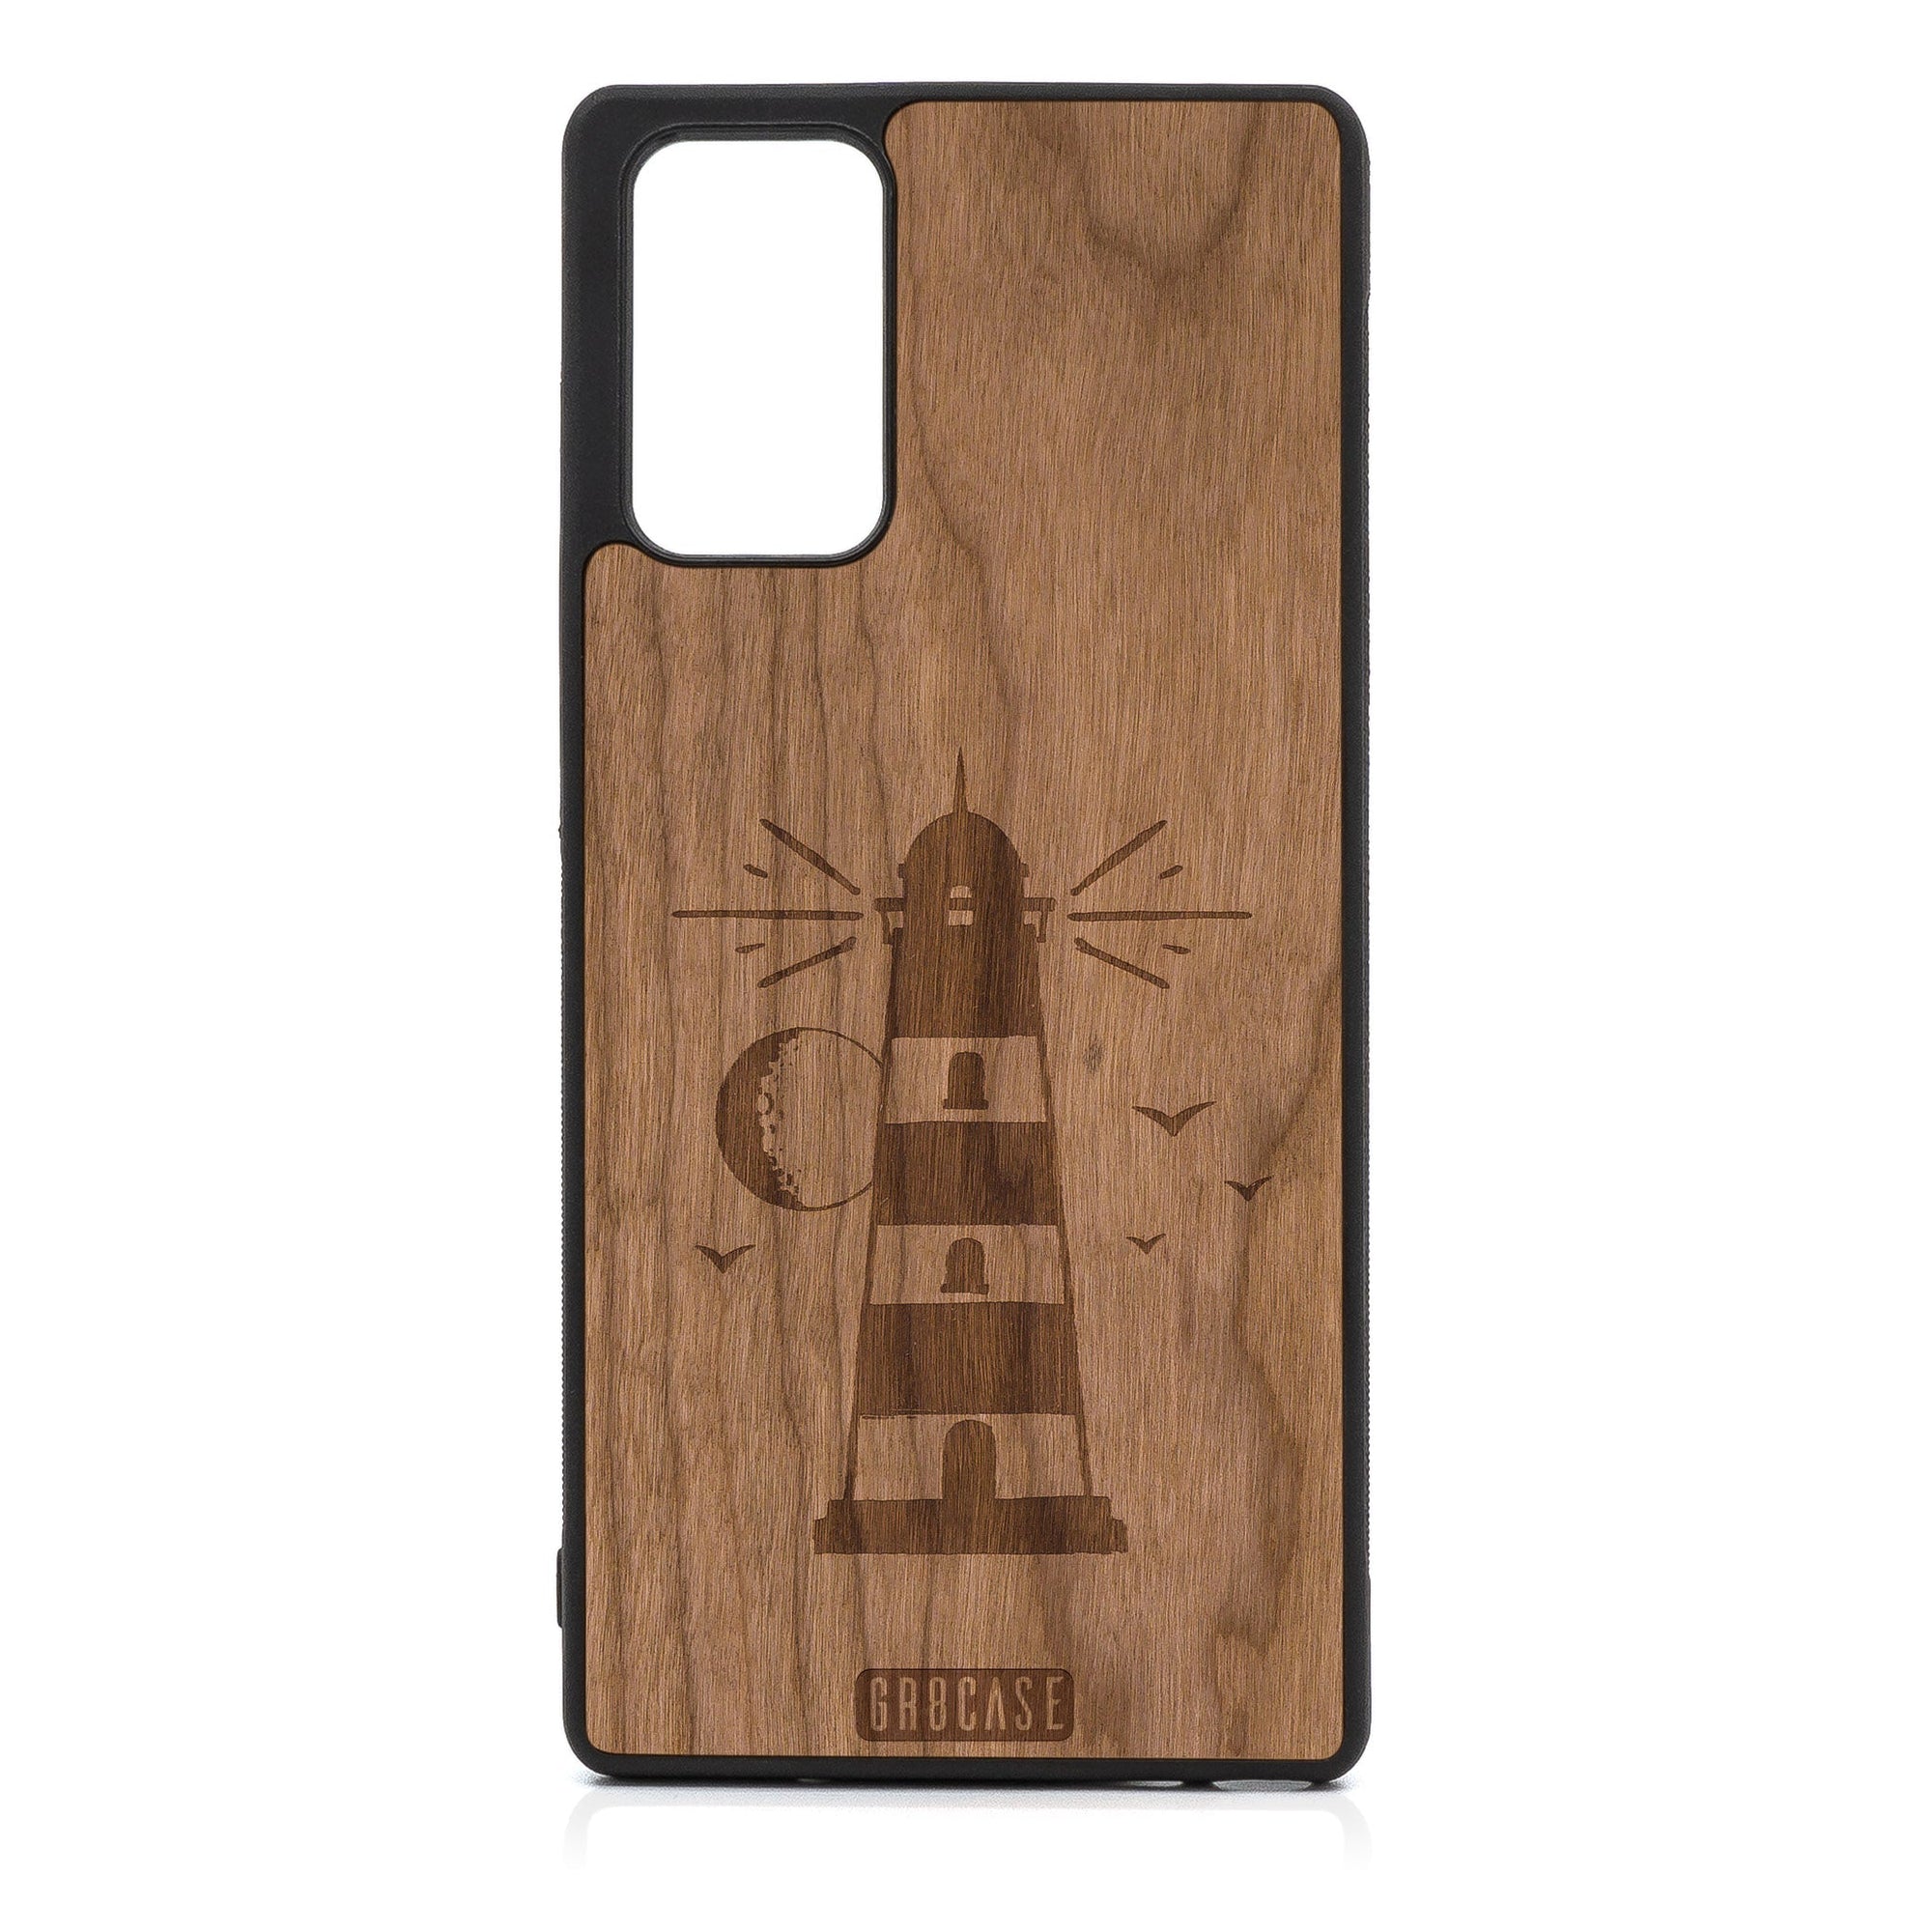 Midnight Lighthouse Design Wood Case For Samsung Galaxy A71 5G